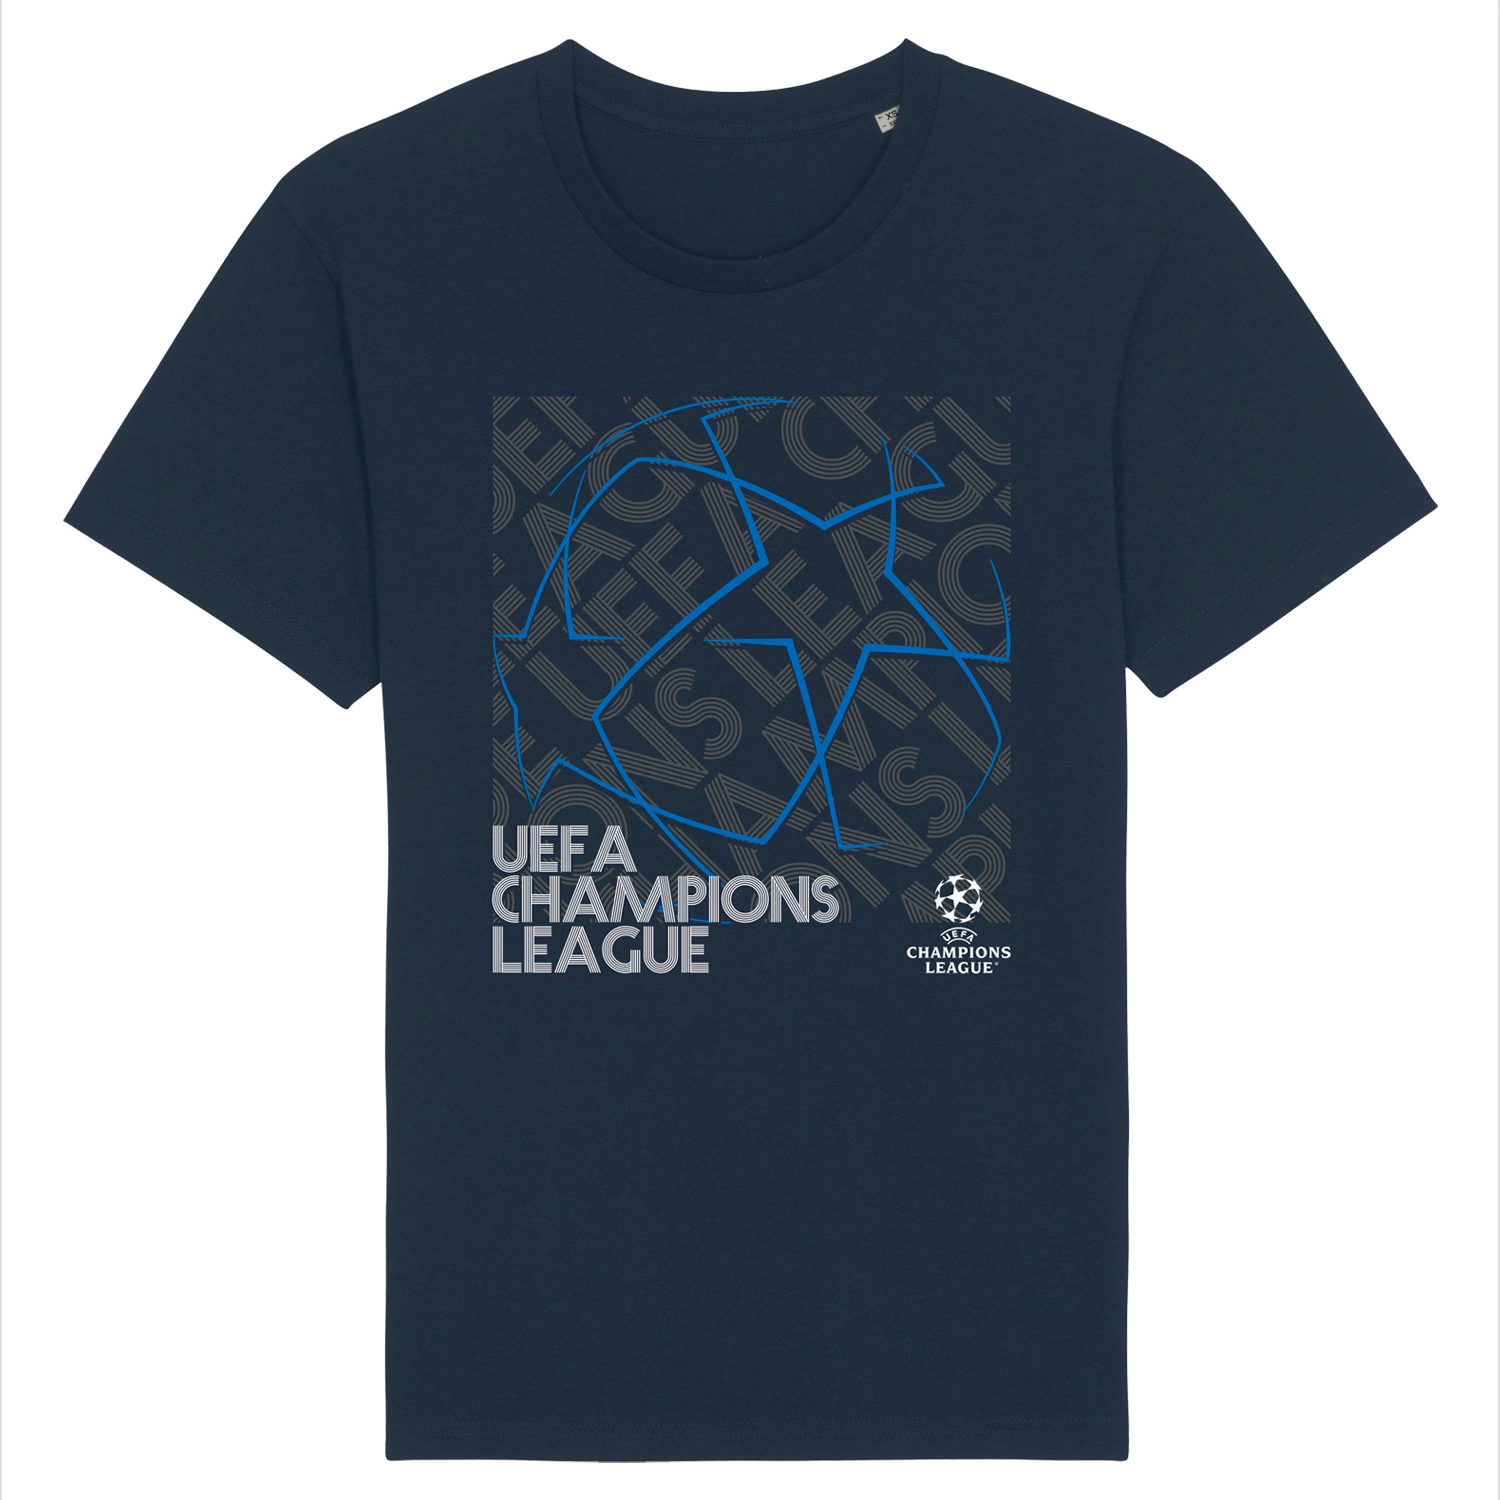 UEFA Champions League - Urban Starball Navy T-Shirt UEFA Club Competitions Online Store